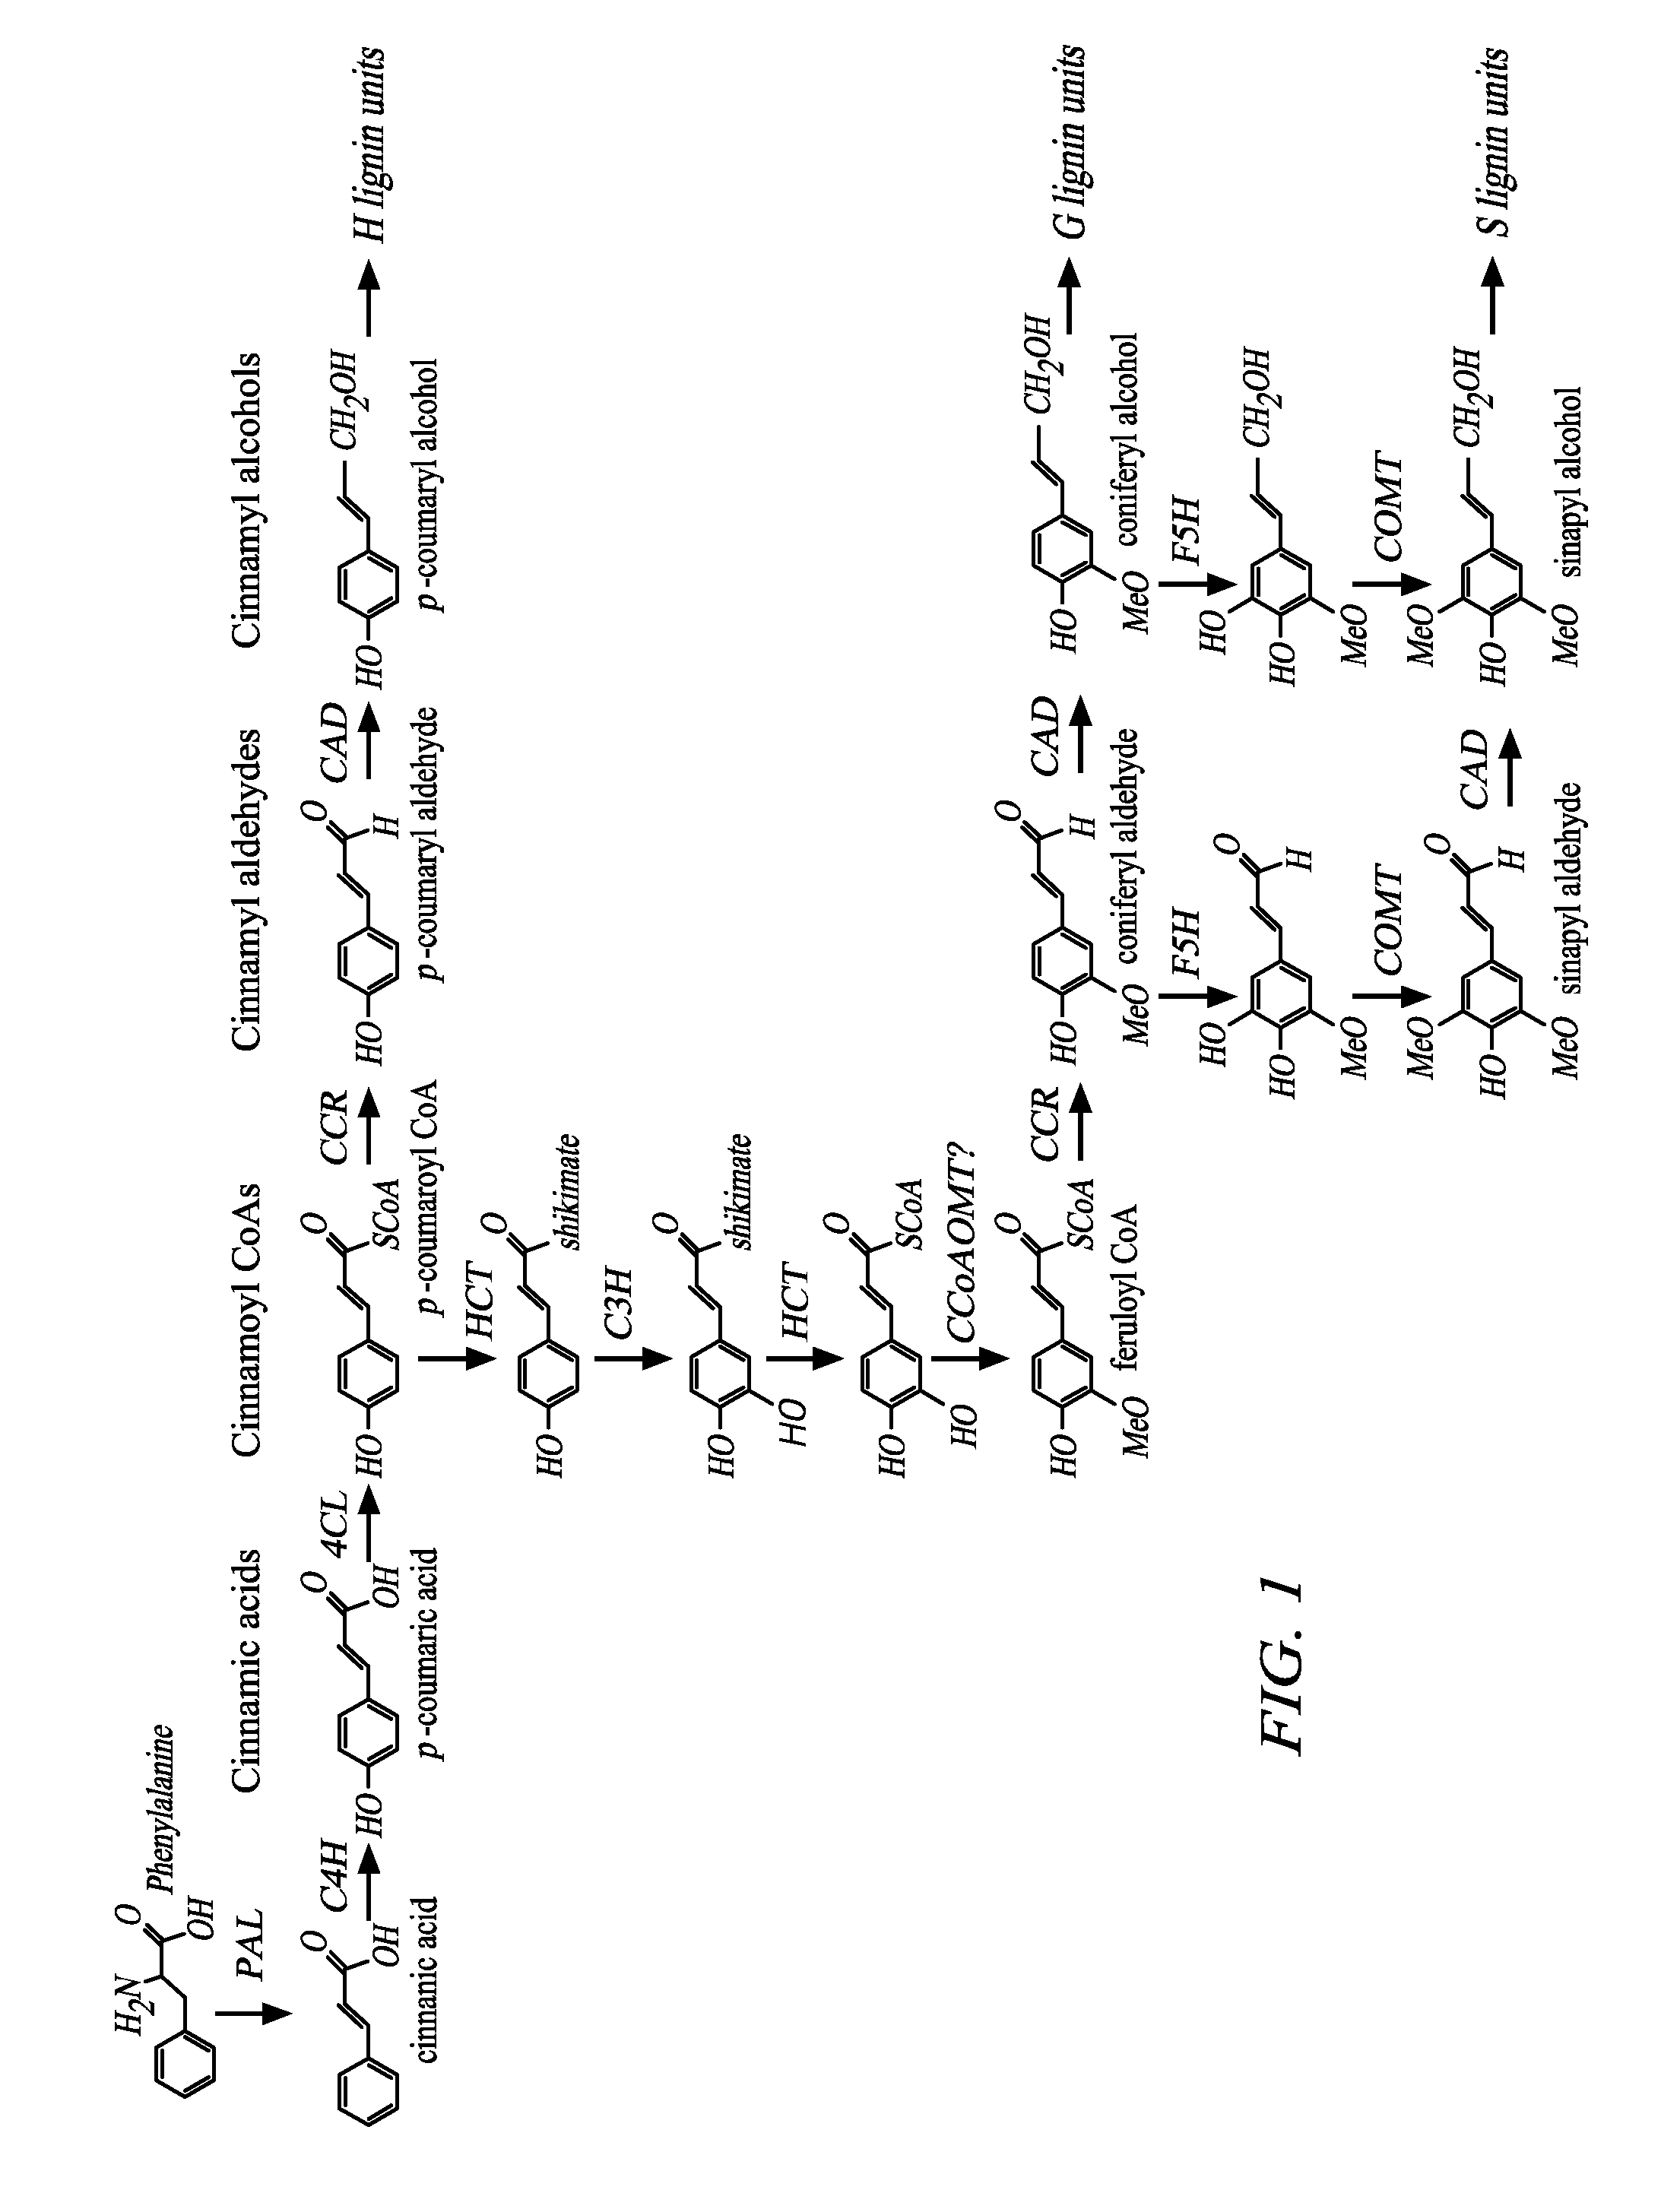 Biofuel production methods and compositions